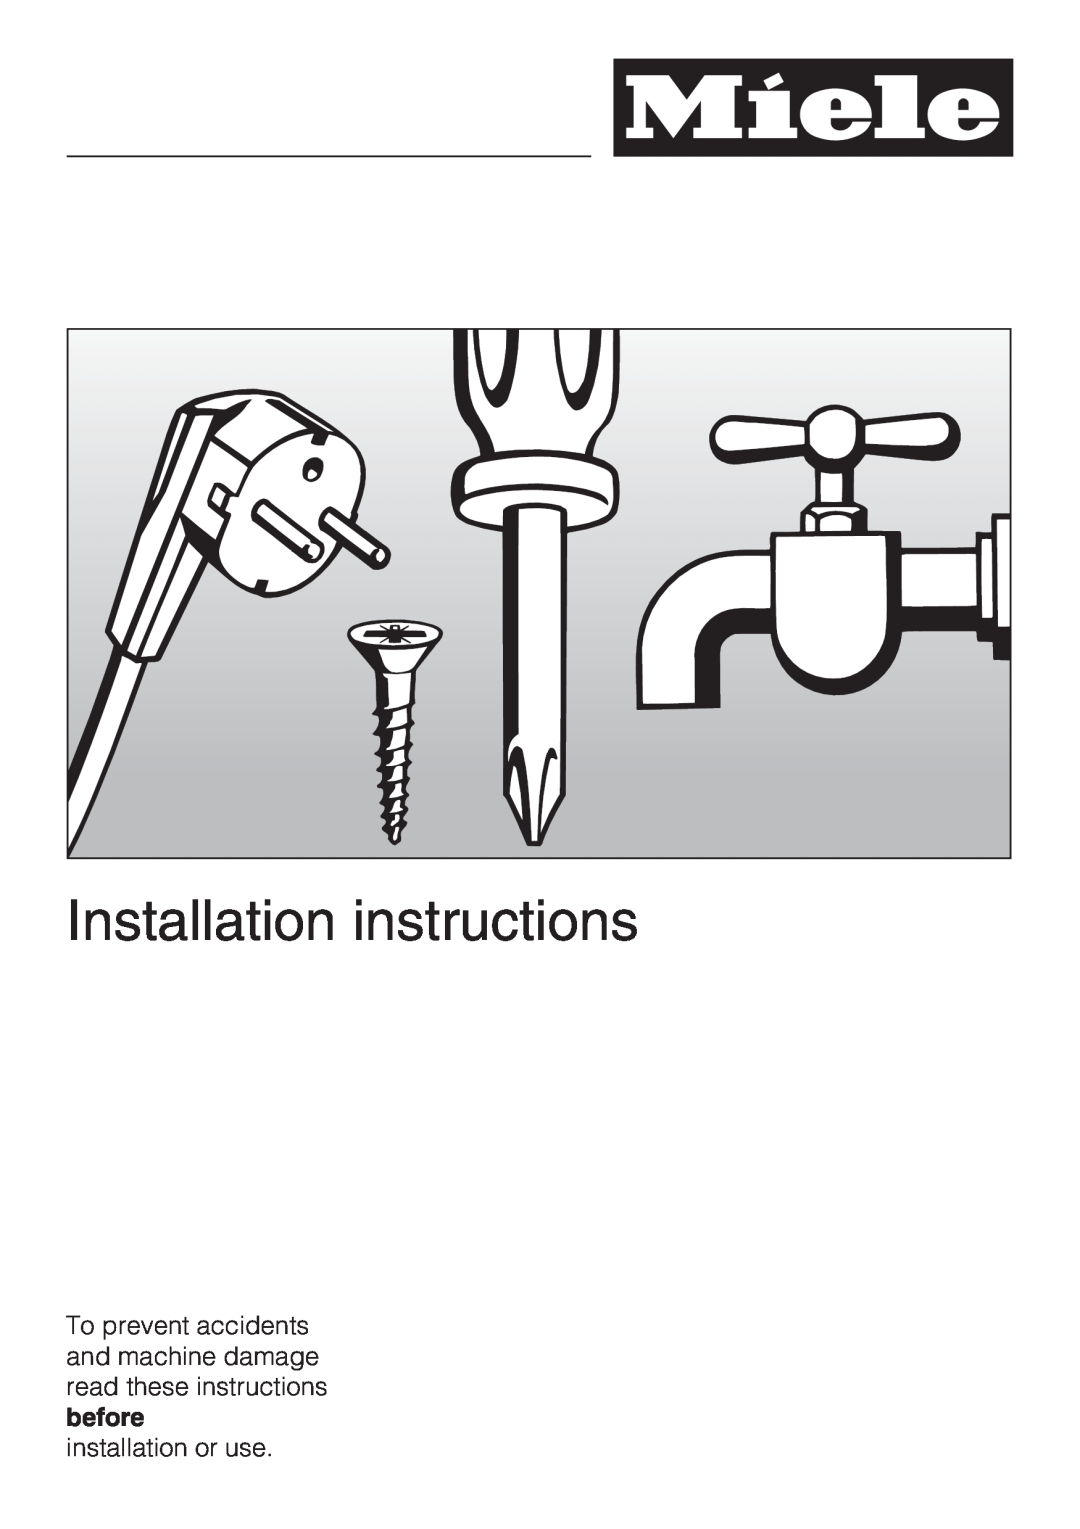 Miele KWT1601SF, KWT1611SF installation instructions Installation instructions, installation or use 